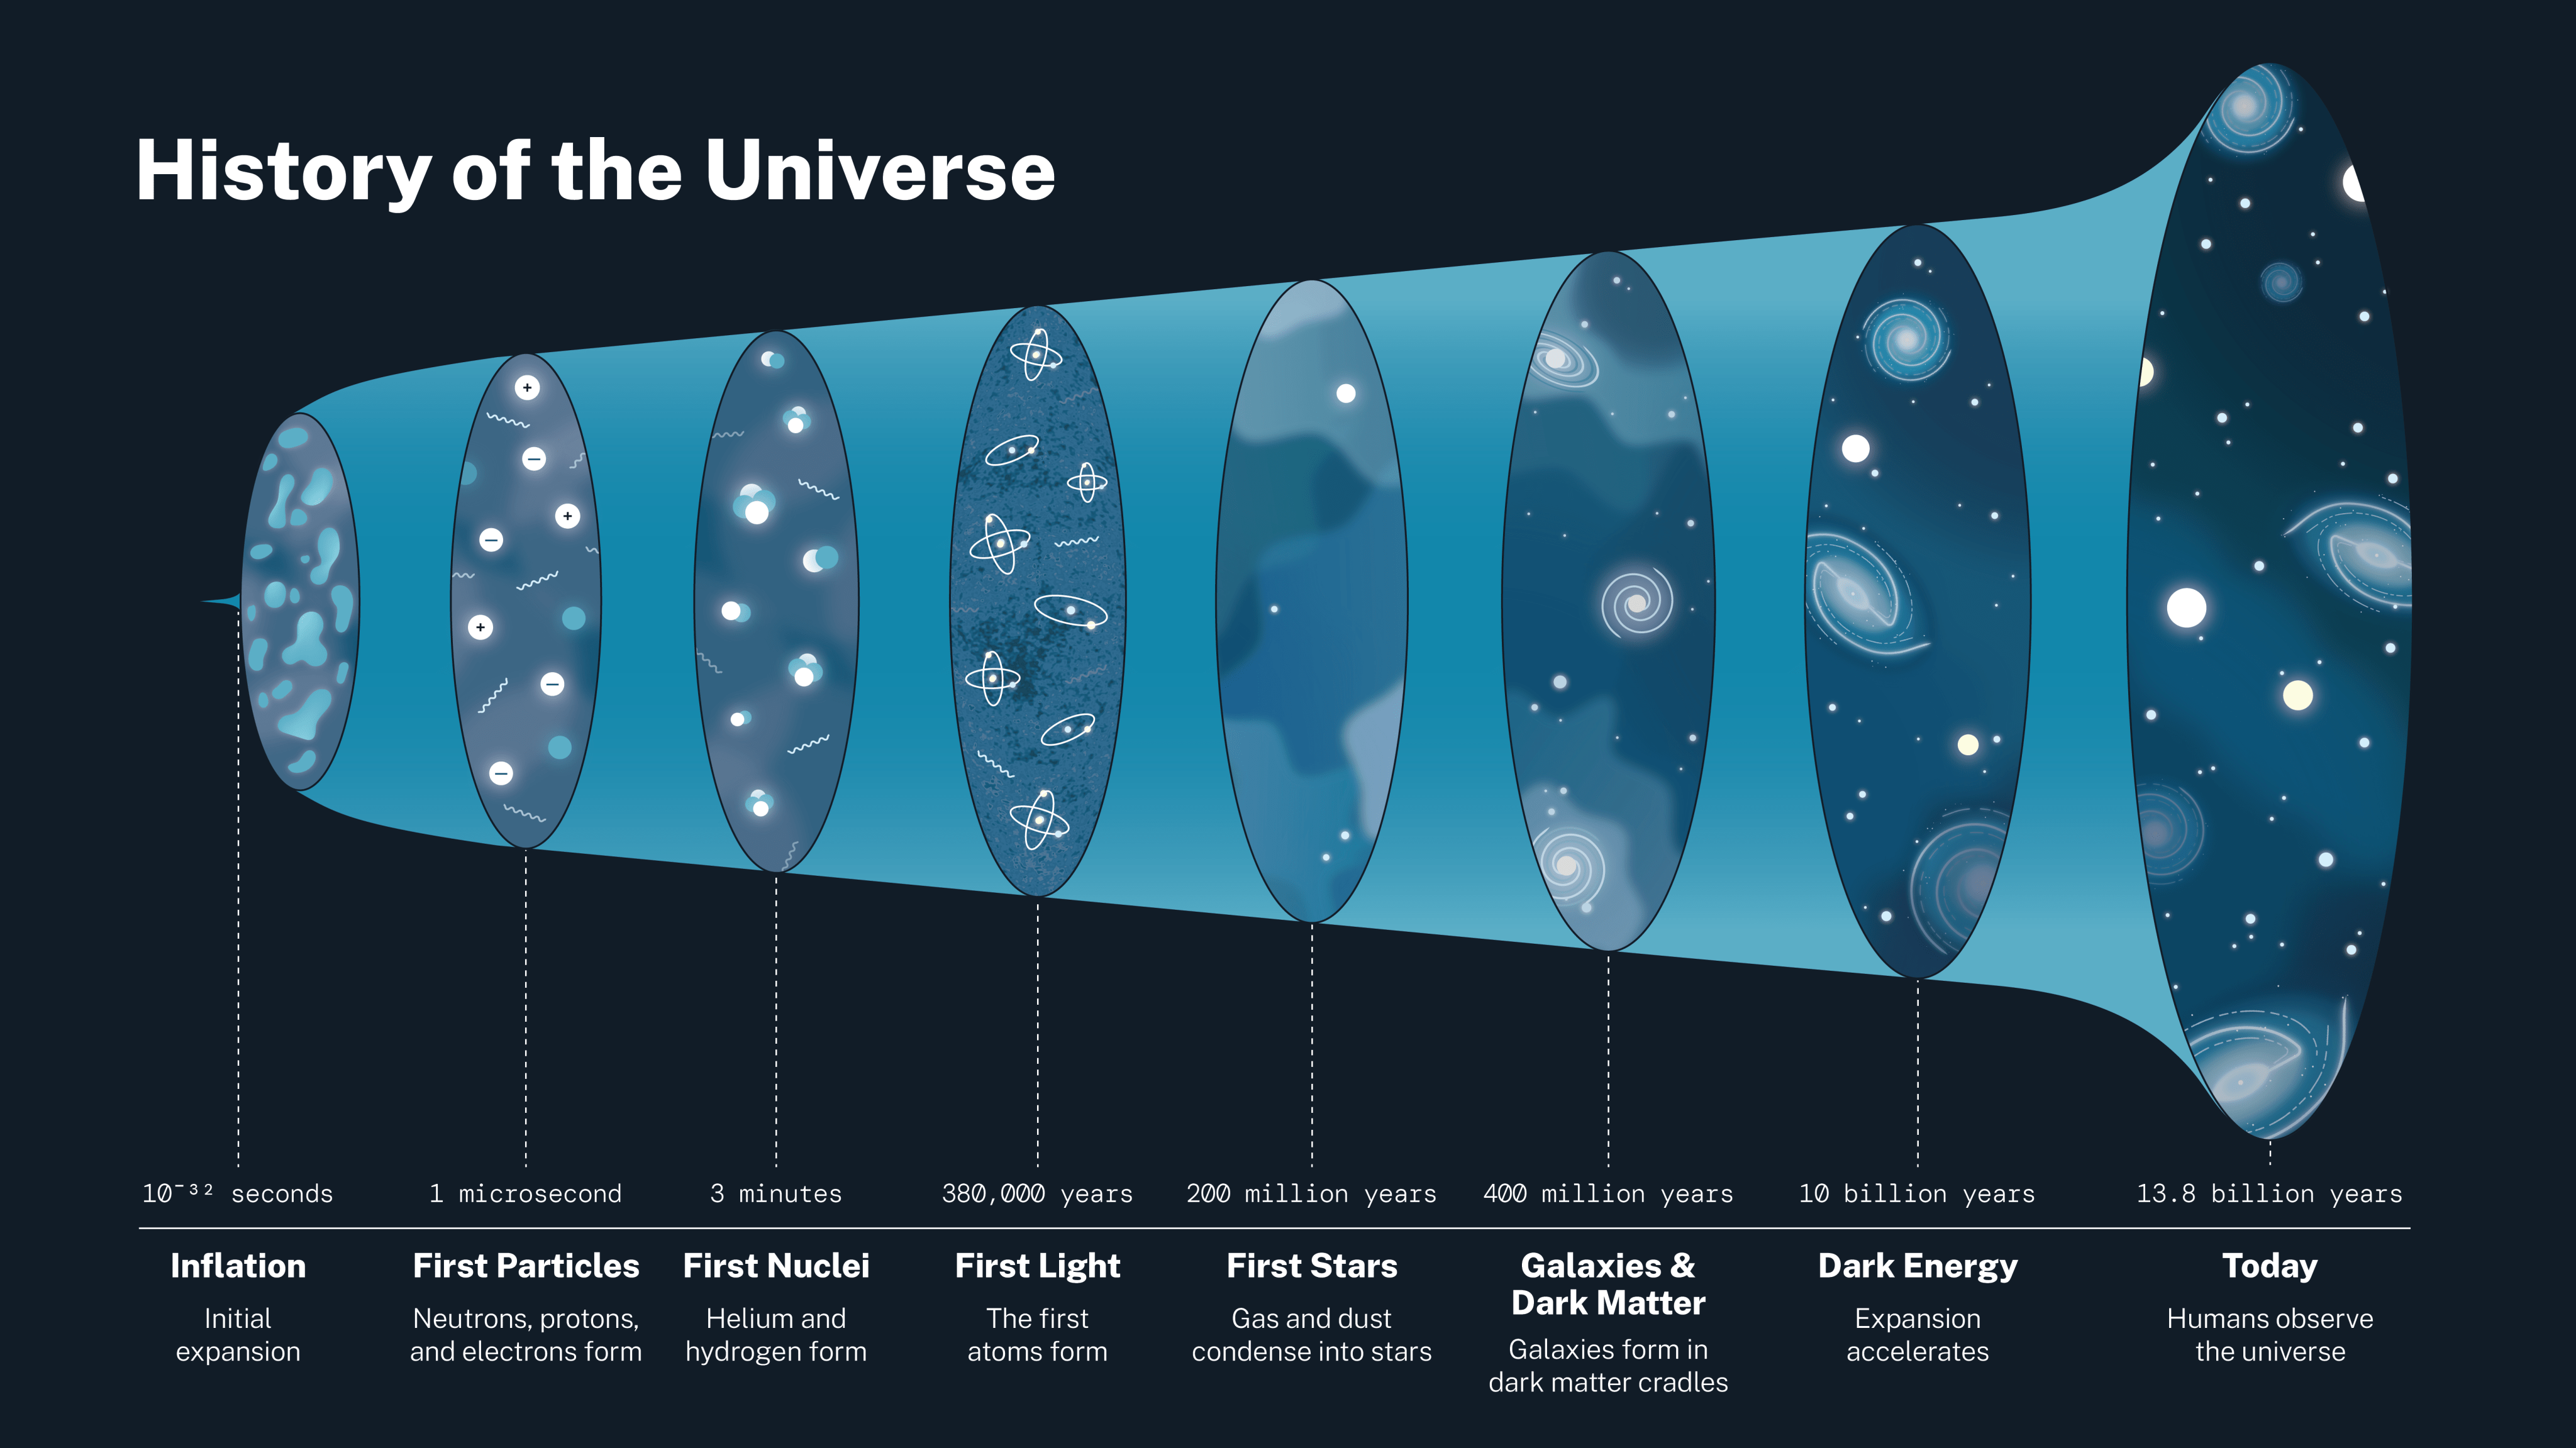 Big Bang Infographic showing the timeline of the history of the big bang and the formation of the building blocks of the universe. he history of the universe is outlined in this infographic. It starts with Inflation, then the first particles in 1 microsecond, followed by first nuclei (10 seconds); first light (300,000 years); first stars (200 million years); galaxies and dark matter (400 million years); dark energy (10 billion years); present (13.8 billion years). NASA